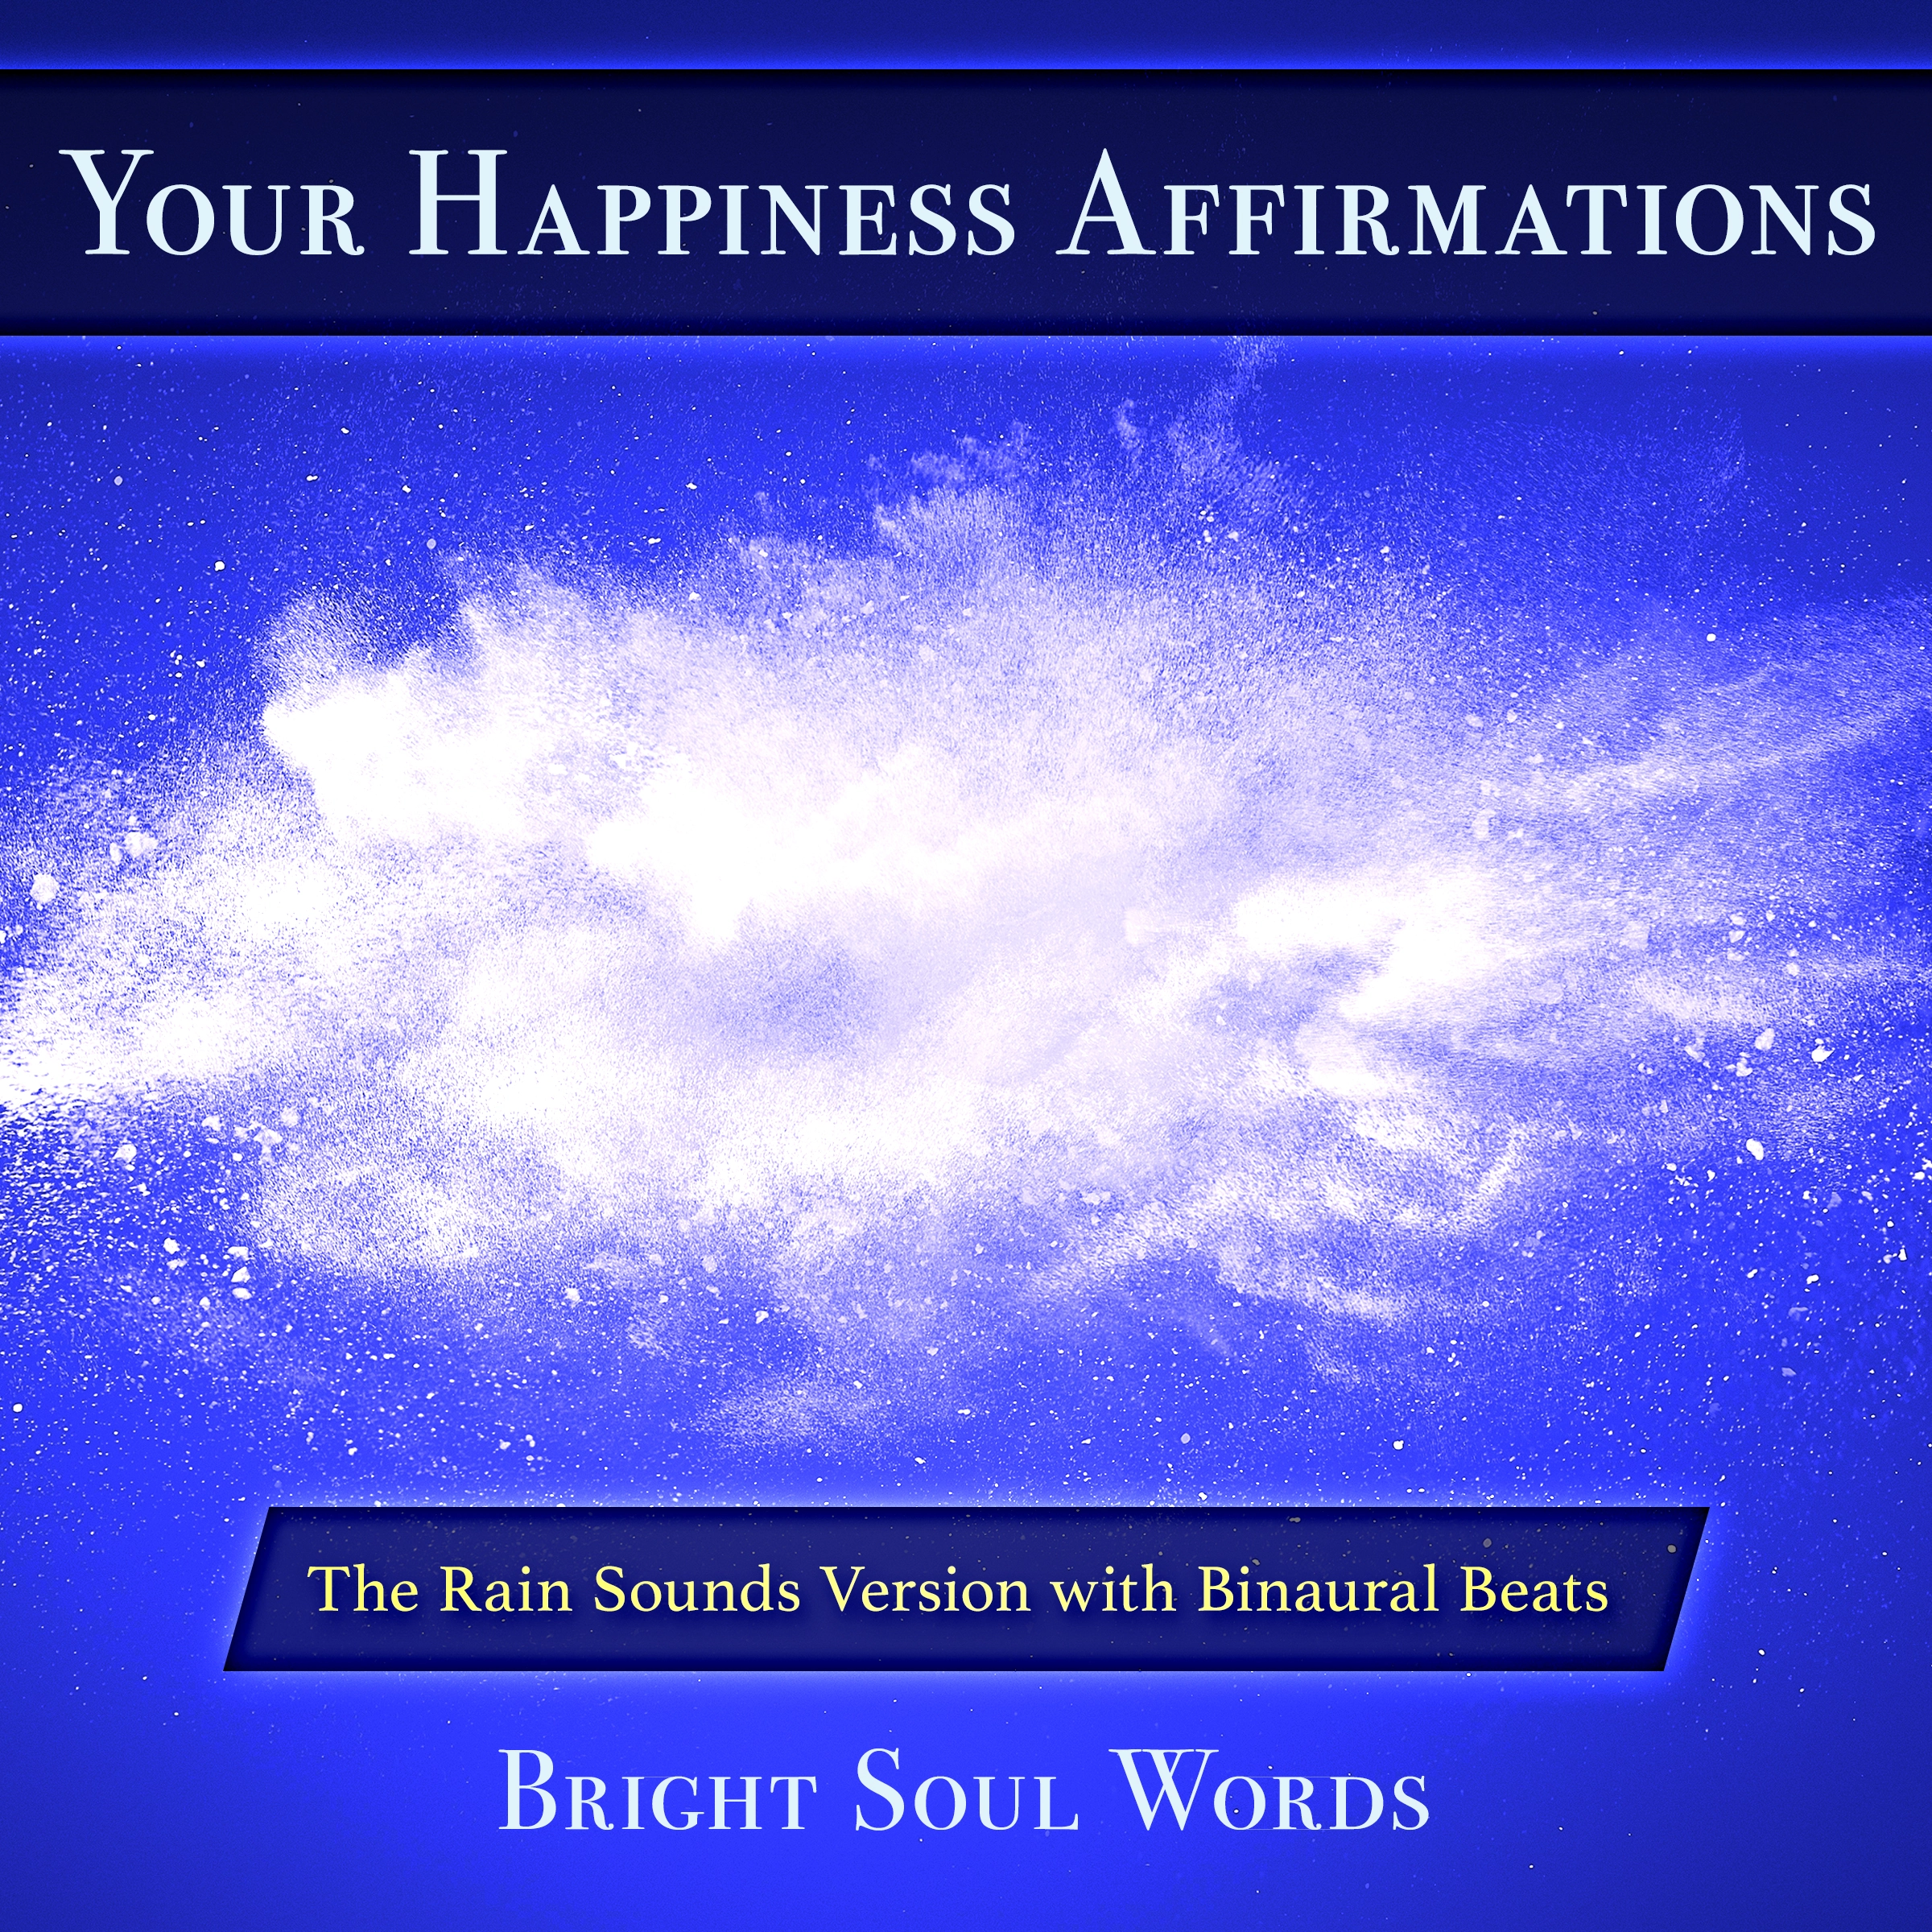 Your Happiness Affirmations: The Rain Sounds Version with Binaural Beats Audiobook by Bright Soul Words